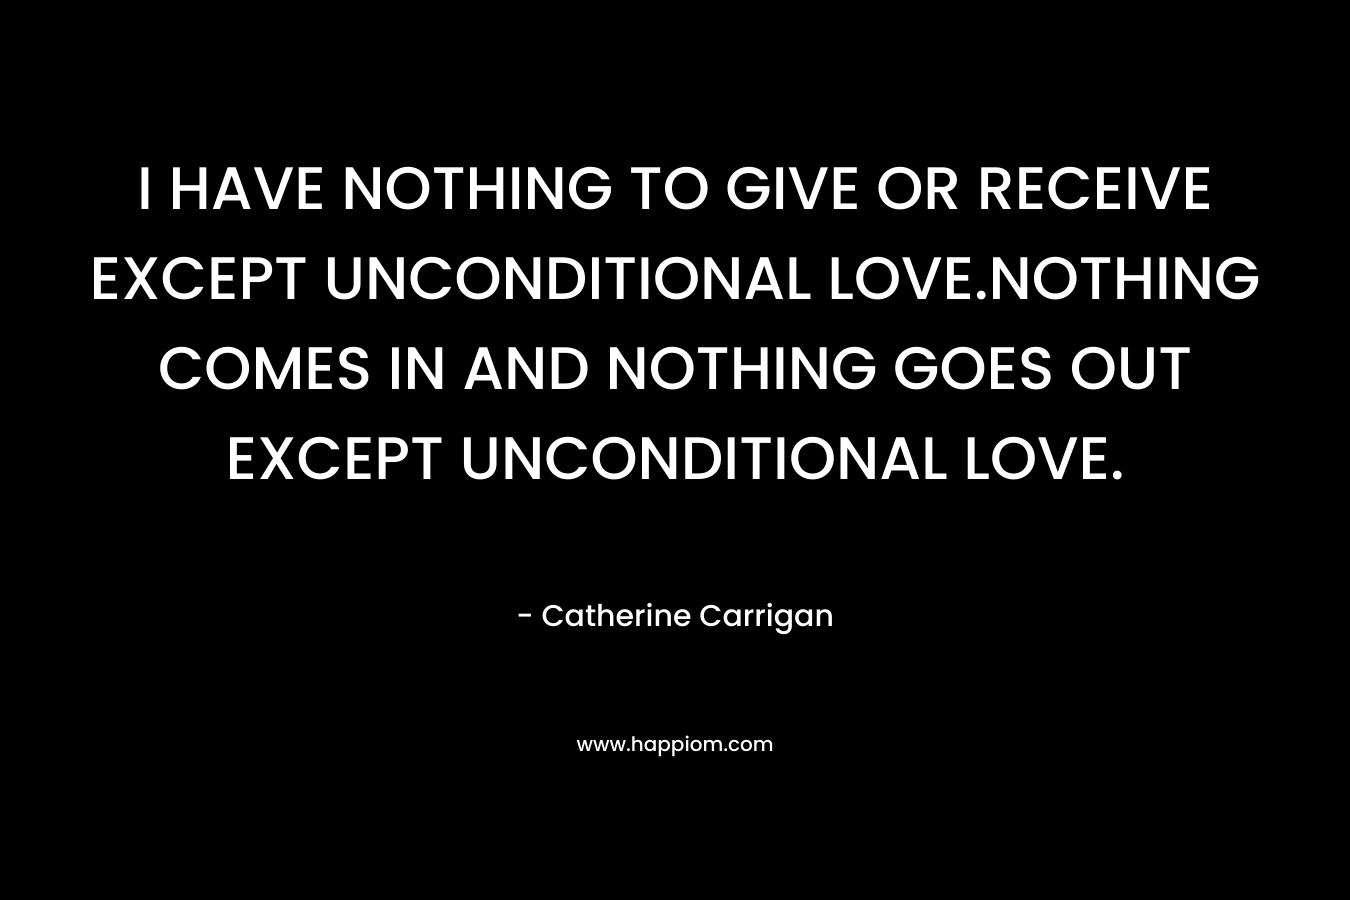 I HAVE NOTHING TO GIVE OR RECEIVE EXCEPT UNCONDITIONAL LOVE.NOTHING COMES IN AND NOTHING GOES OUT EXCEPT UNCONDITIONAL LOVE.